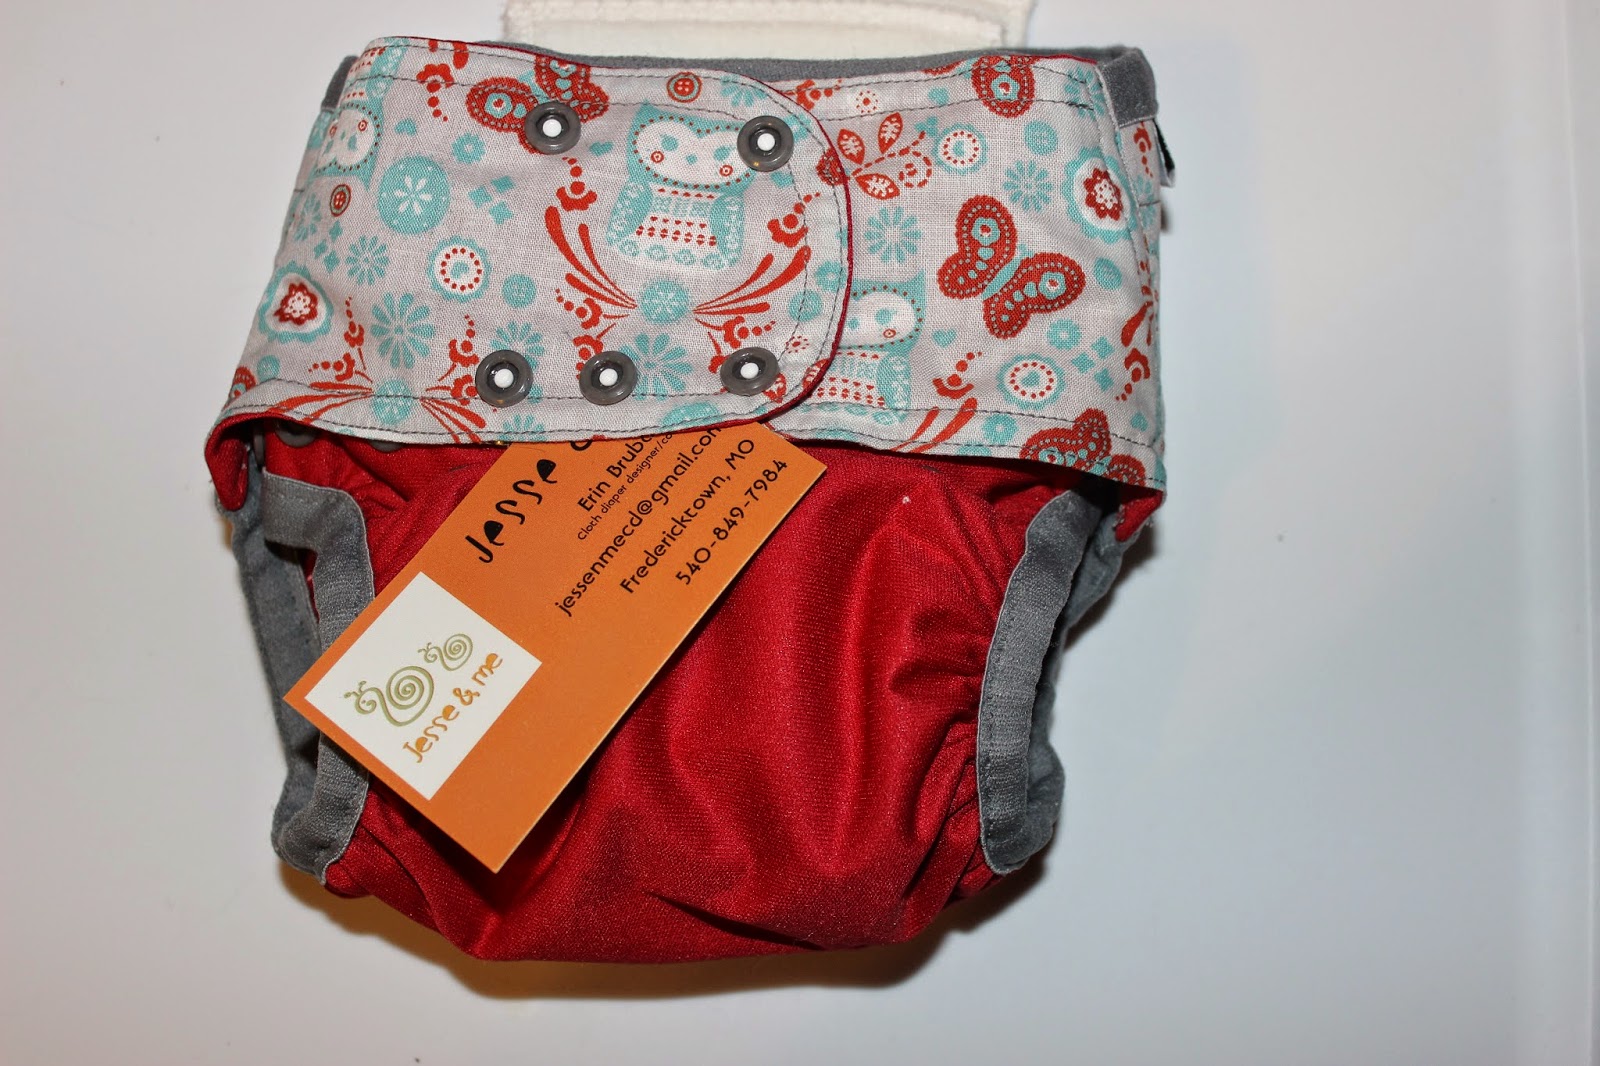 Trying To Go Green: Jesse & Me A12 Cloth Diaper Review & Giveaway